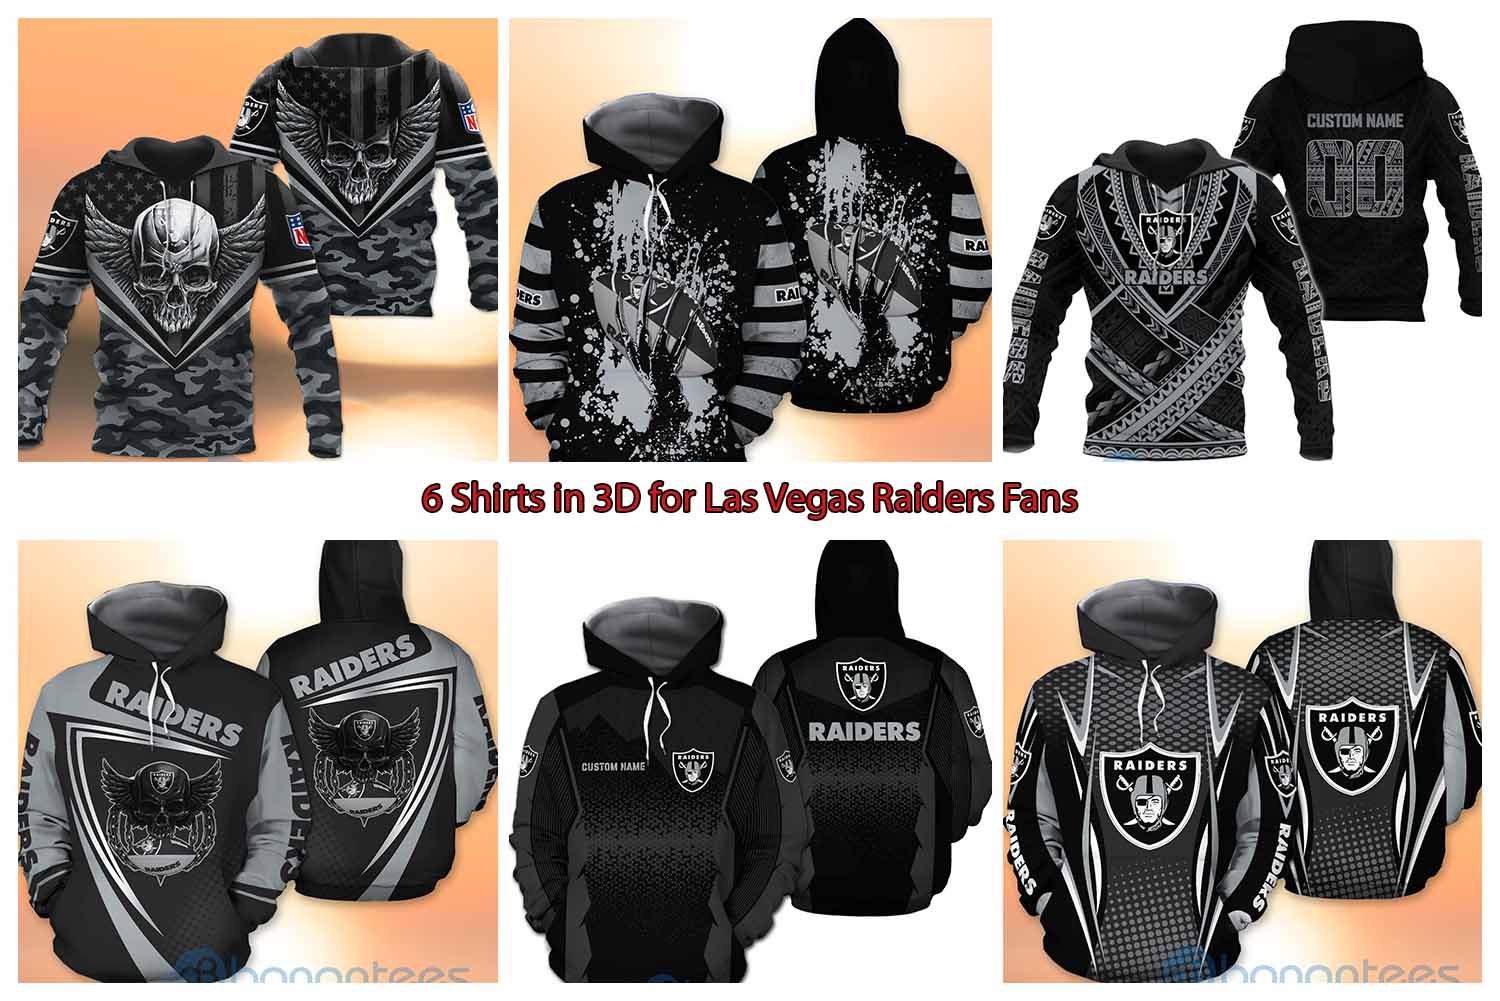 6 Shirts in 3D for Las Vegas Raiders Fans